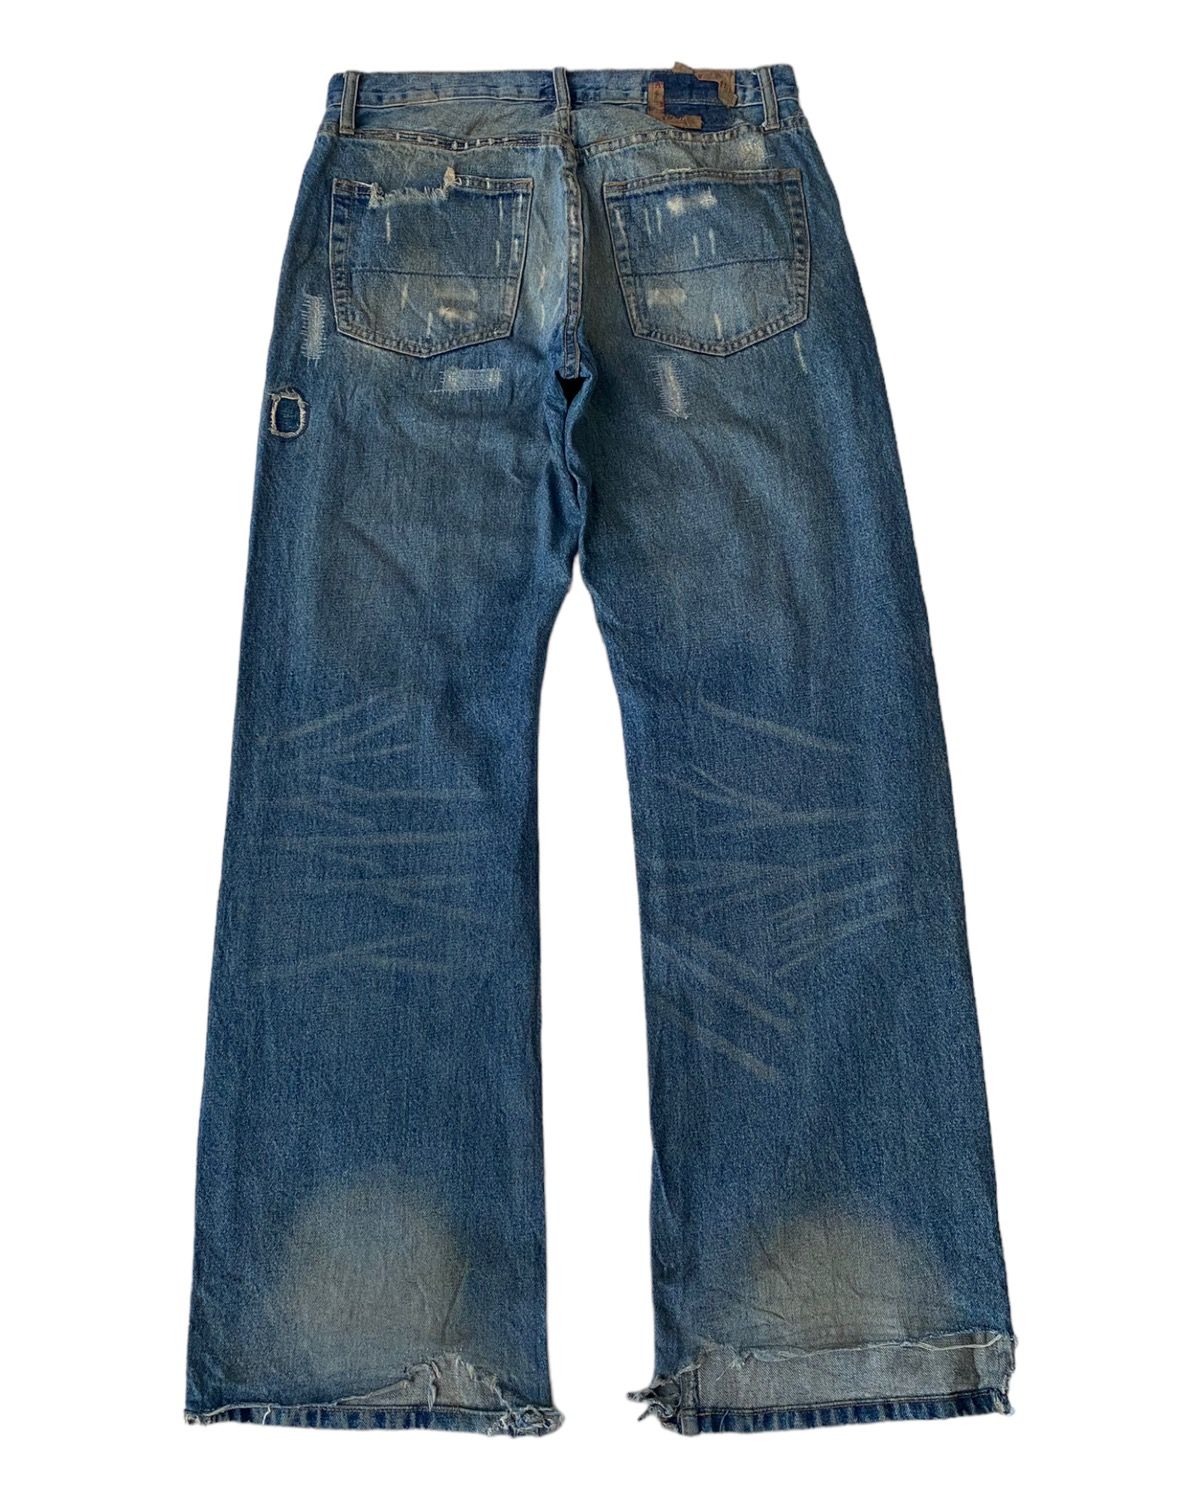 🔥FLARE JEANS RUSTY BAGGY ABERCROMBIE & FITCH DISTRESS DENIM - 2